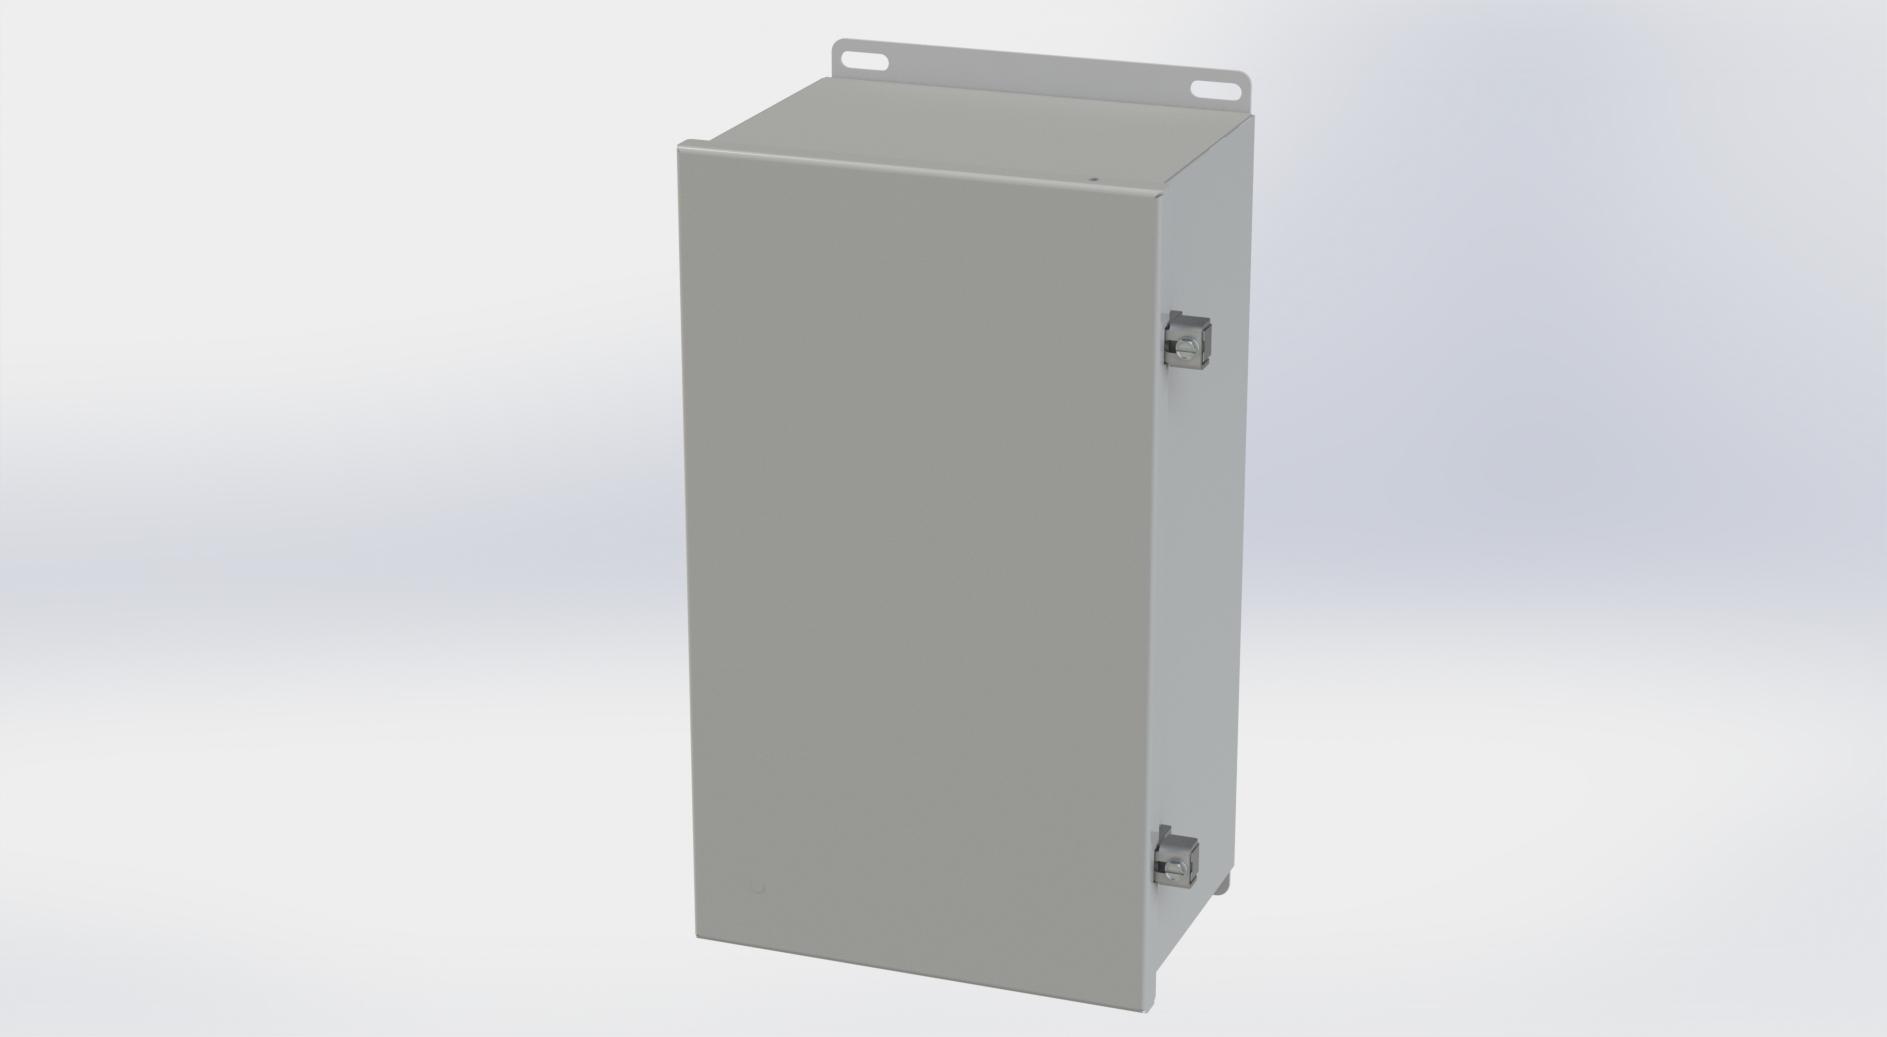 Saginaw Control SCE-14086CHNF CHNF Enclosure, Height:14.13", Width:8.00", Depth:6.00", ANSI-61 gray powder coating inside and out. Optional sub-panels are powder coated white.